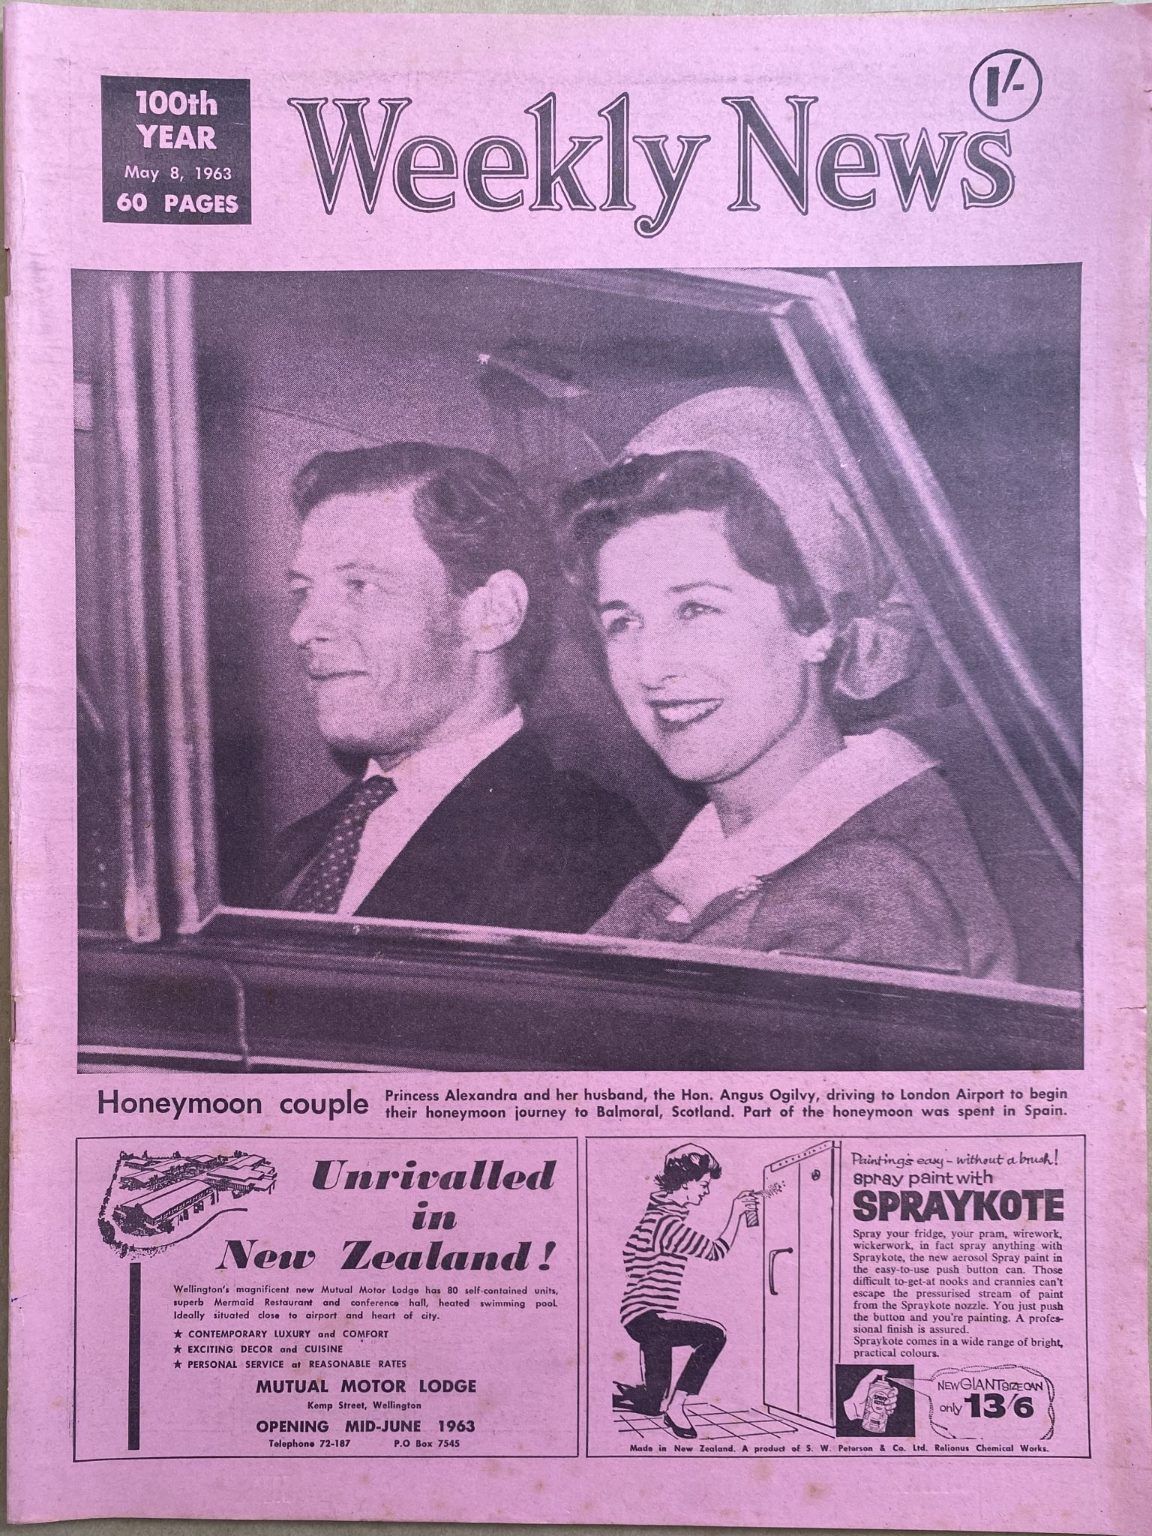 OLD NEWSPAPER: The Weekly News, No. 5189, 8 May 1963